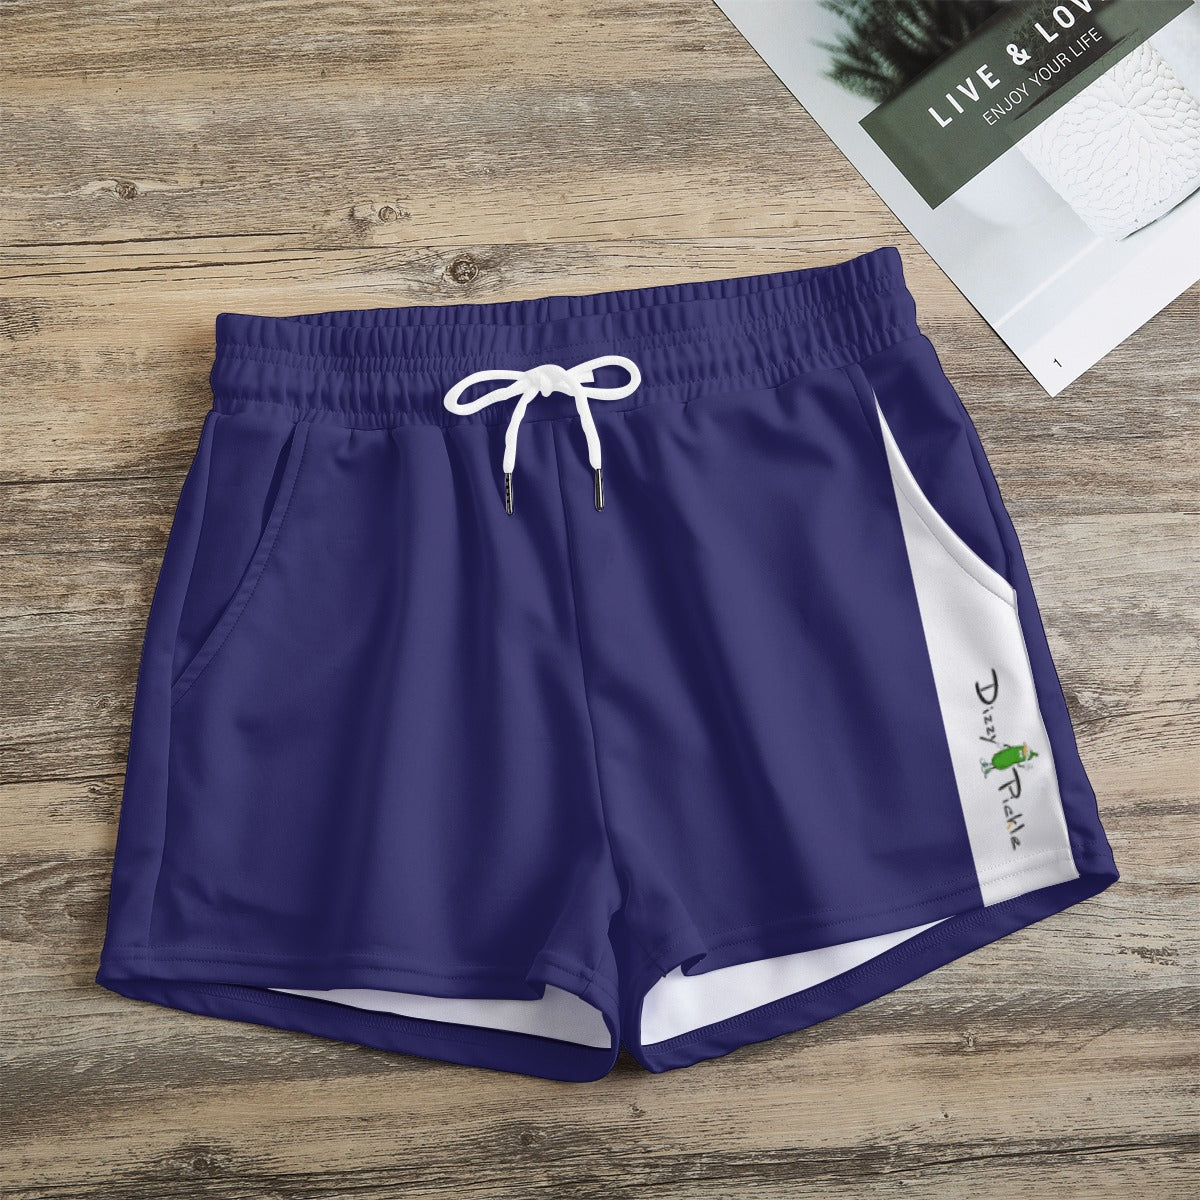 Dizzy Pickle DZY P Classic Women's Pickleball Casual Shorts with Pockets Eggplant